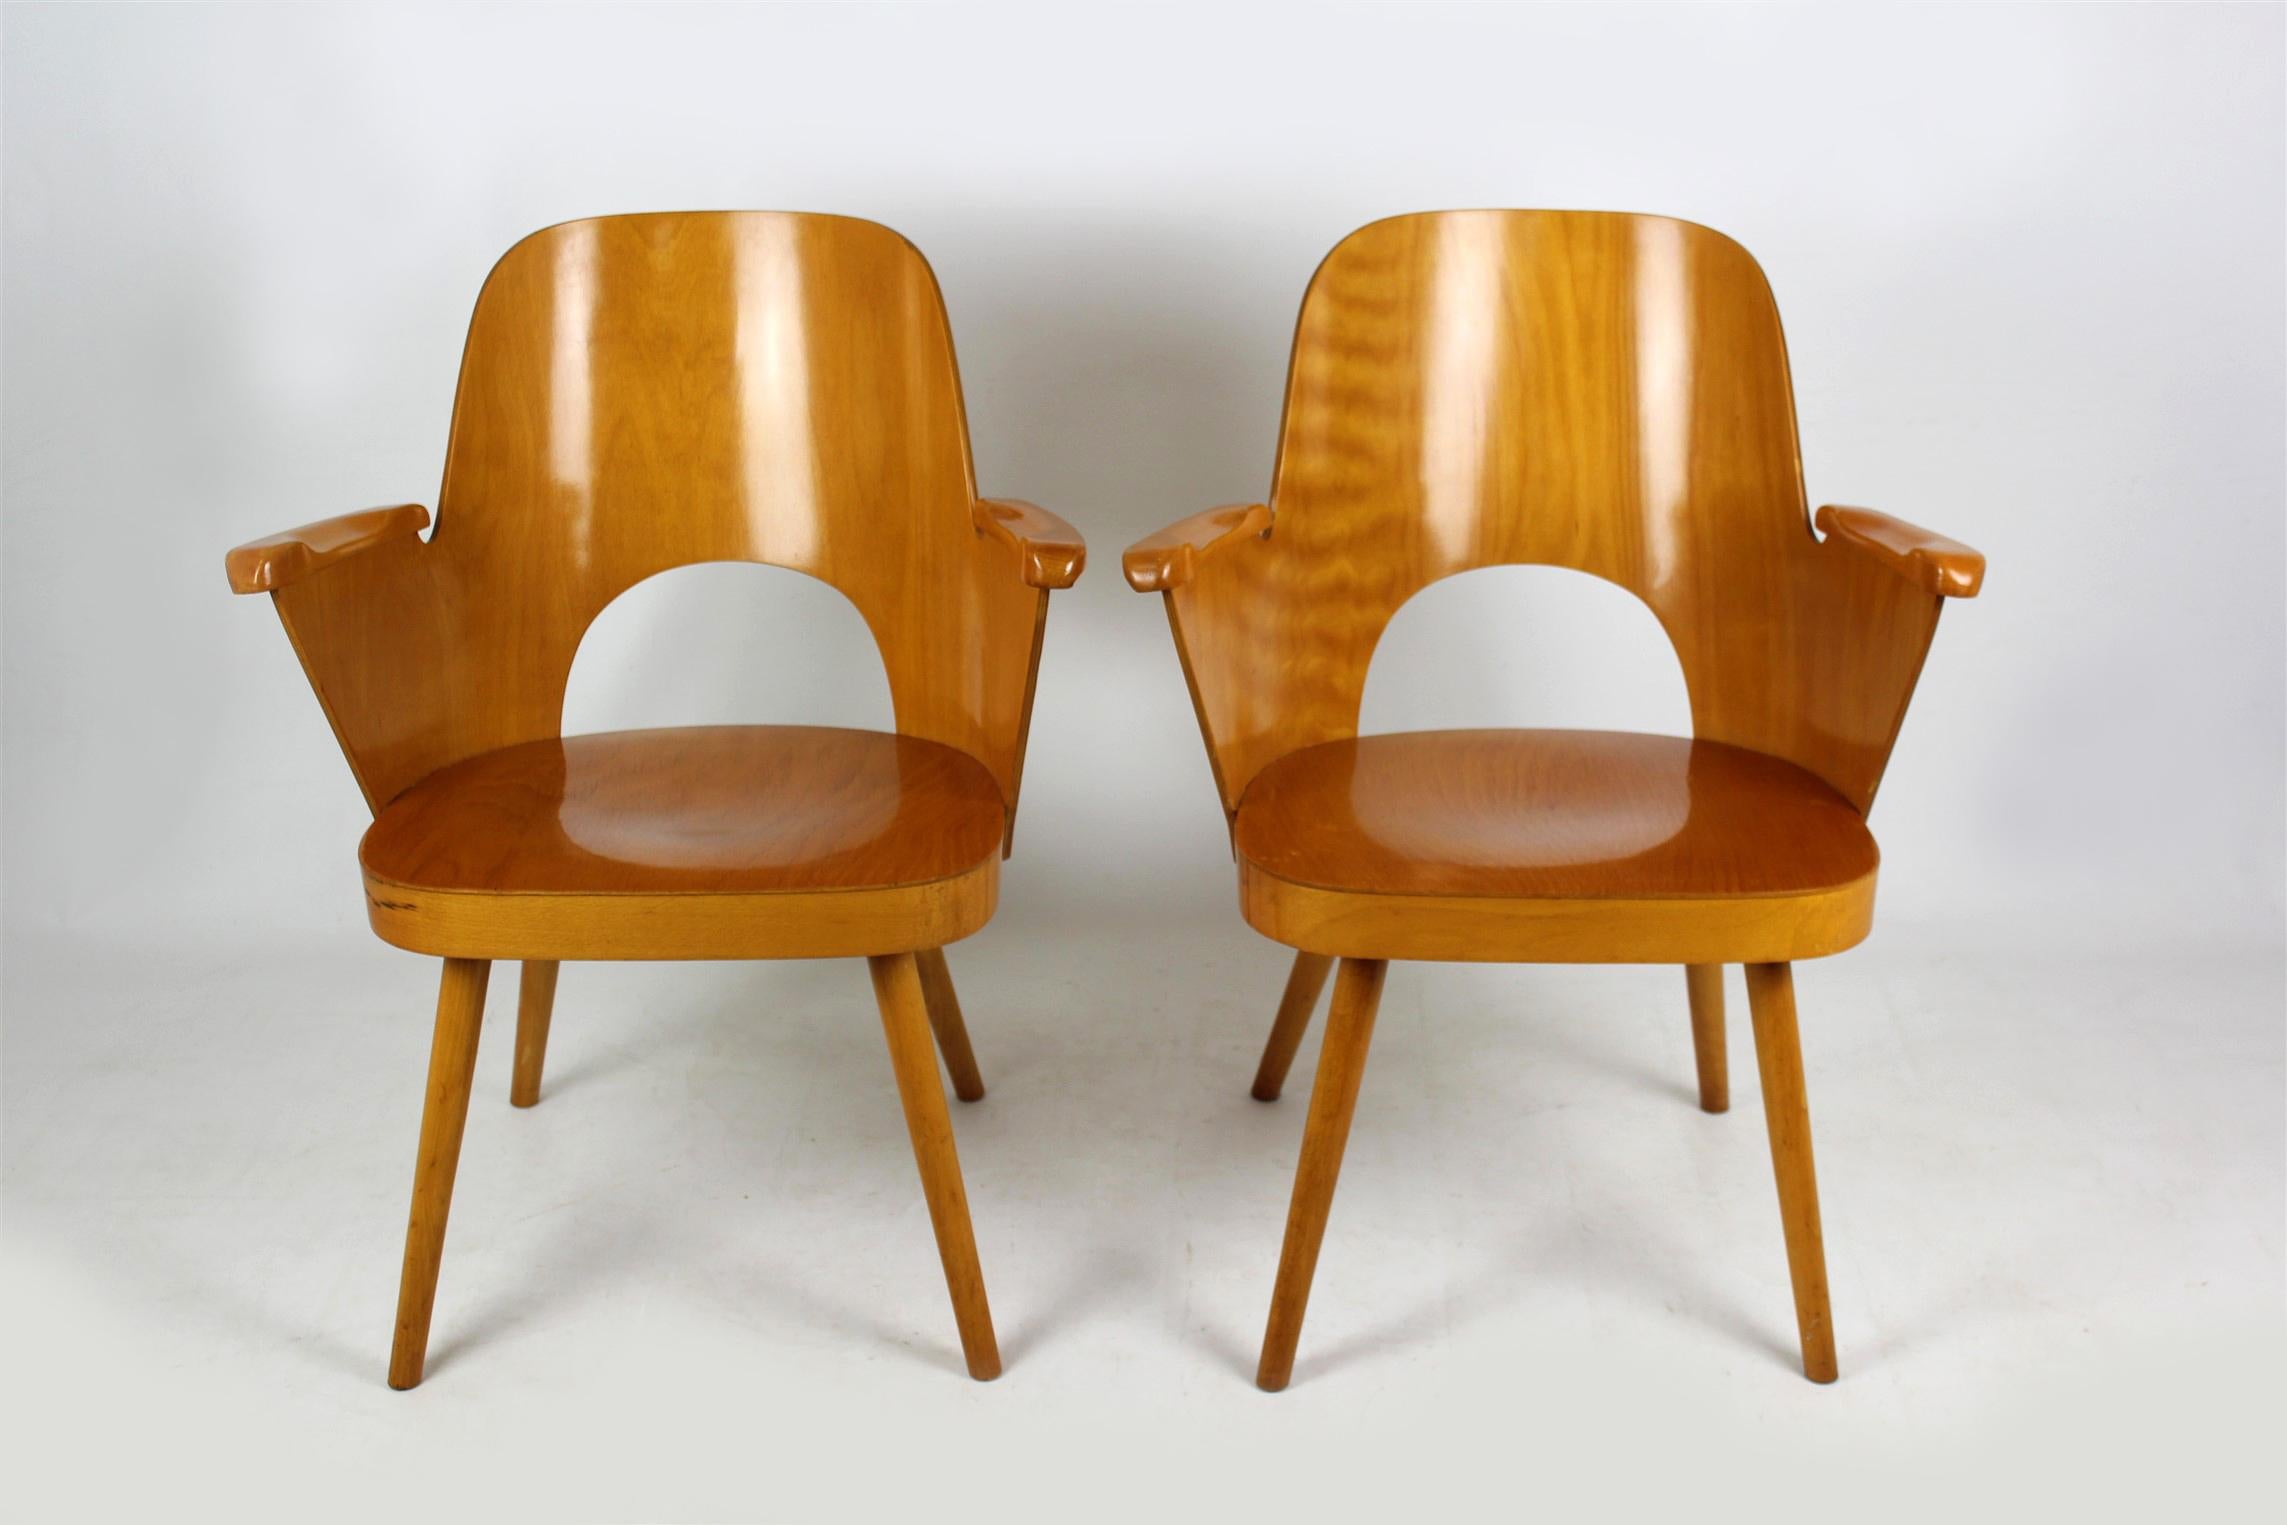 Wooden armchairs, designed by Lubomír Hofmann for TON (Thonet) in the 1950s. Produced in 1961 by Ton, Bystrice pod Hostynem. Made of beech wood and bent plywood. Kept in original, very good condition.